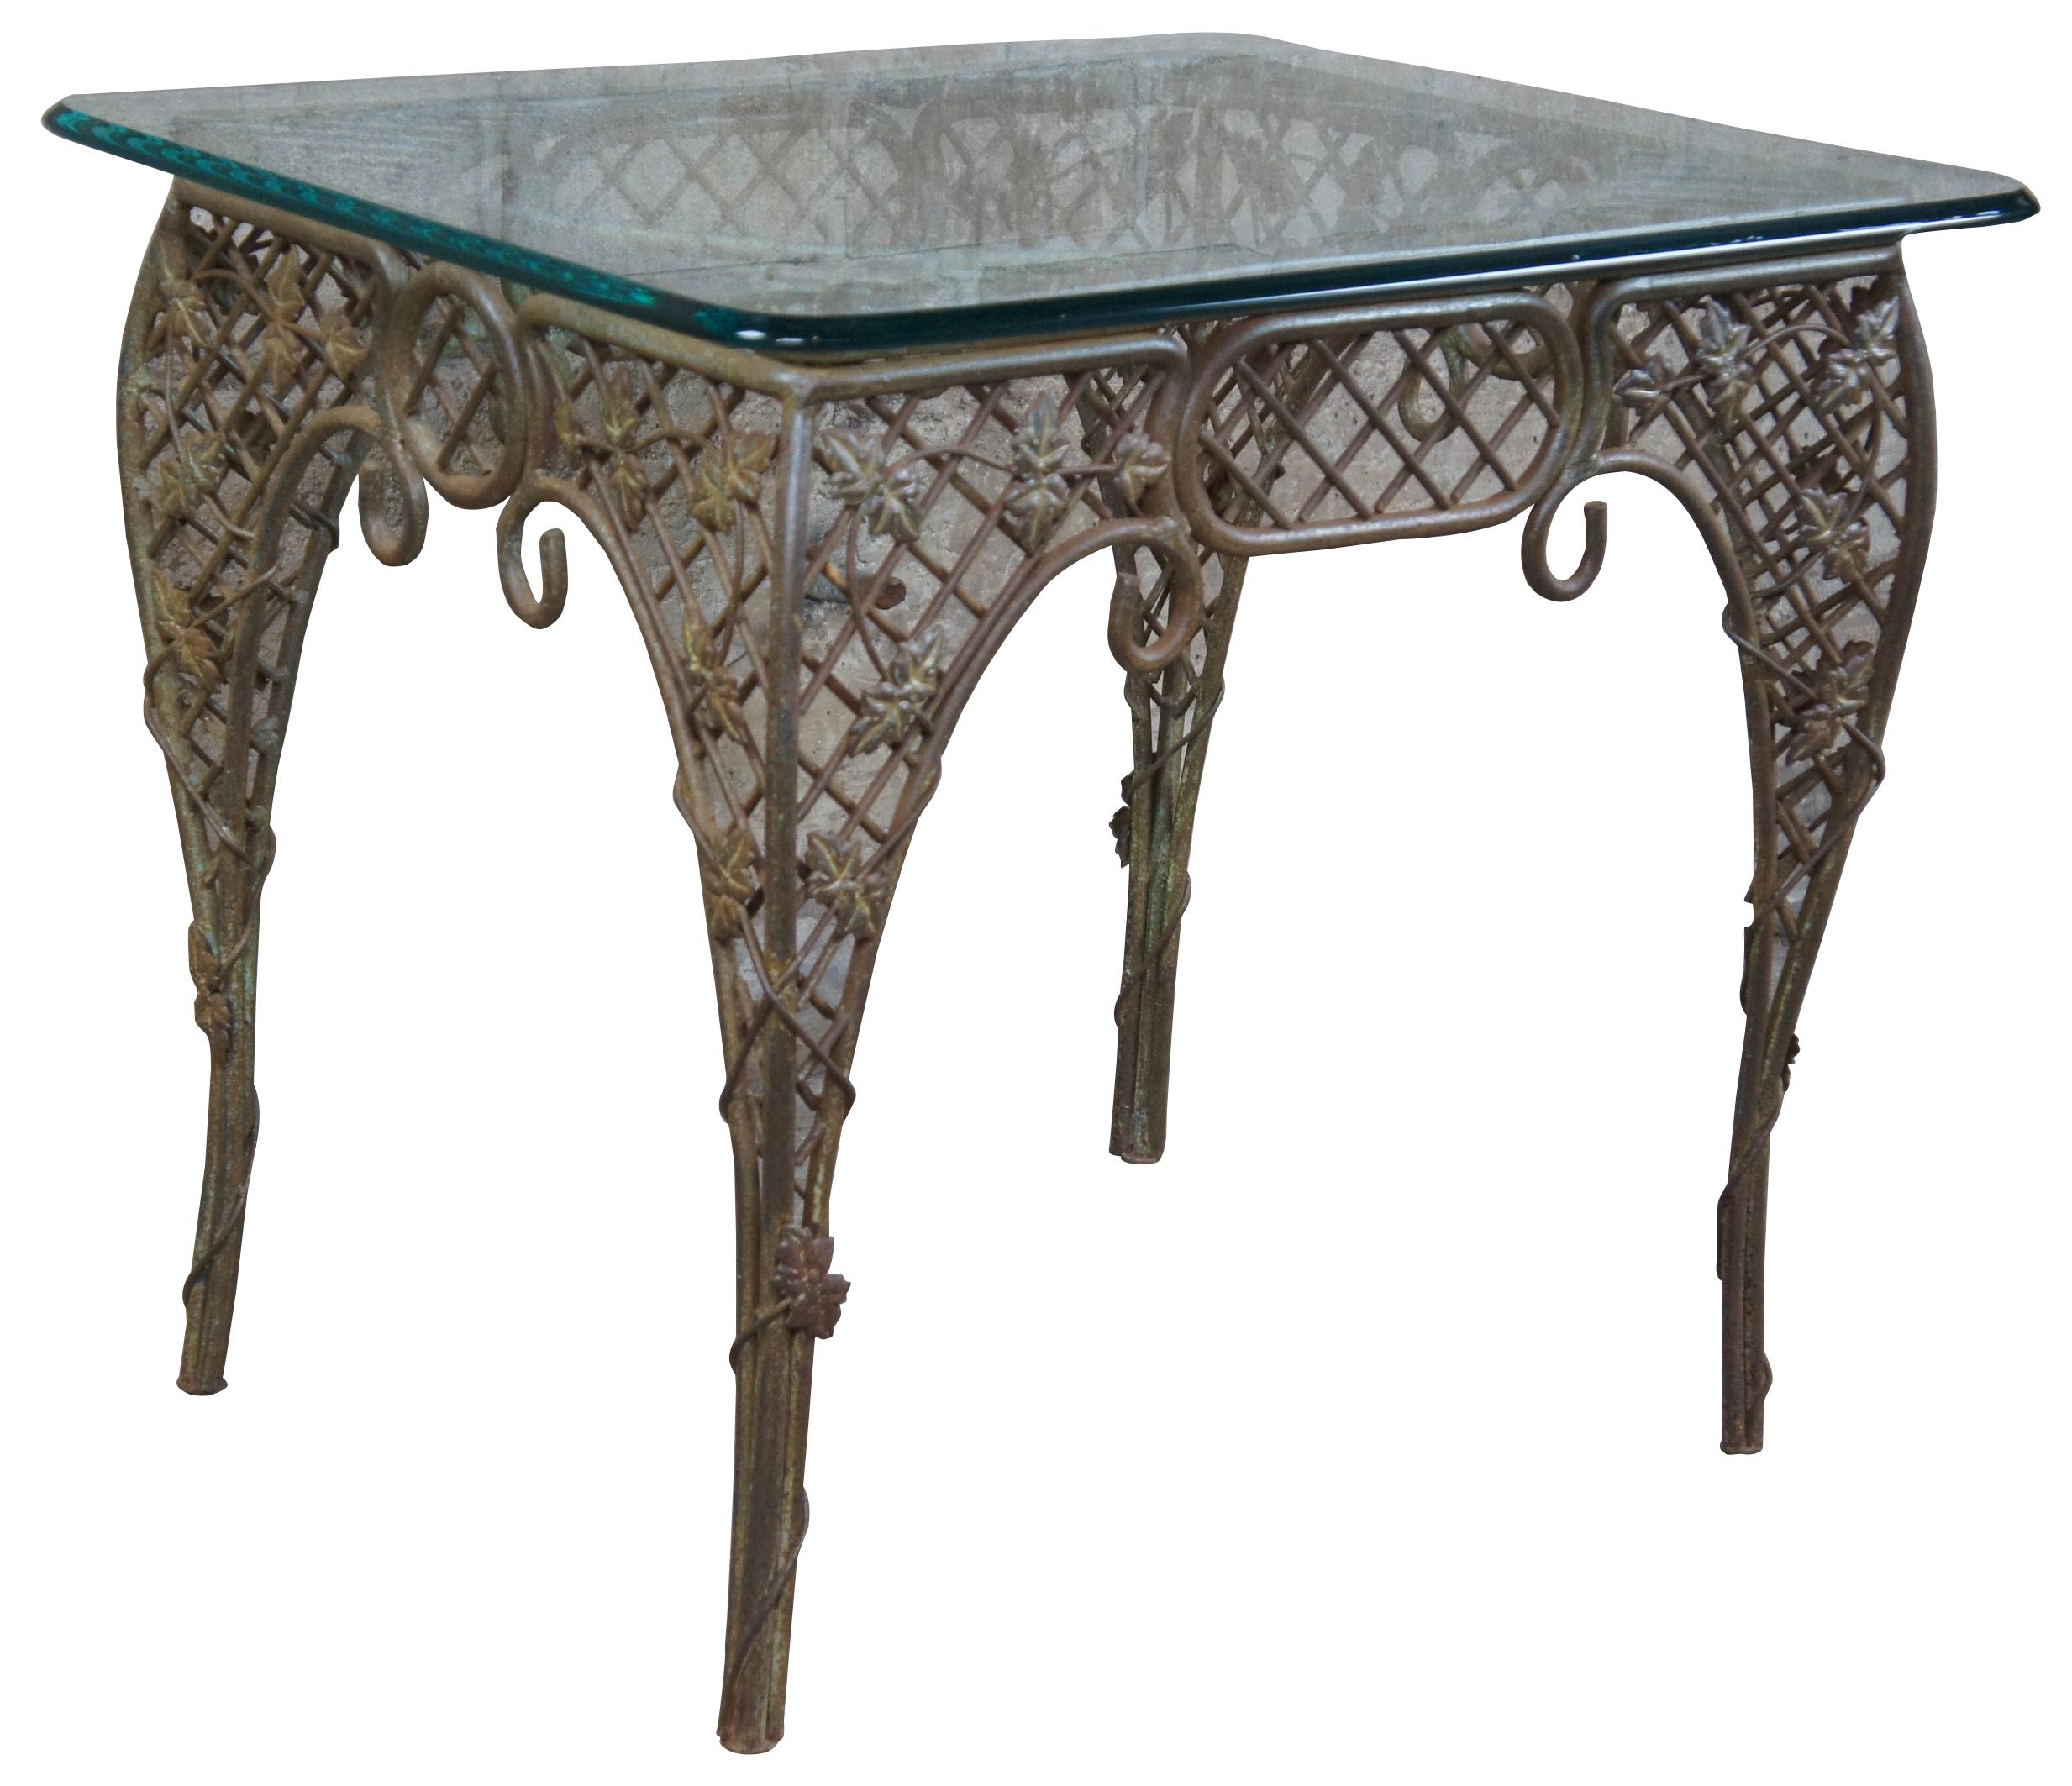 Heavy wrought iron French outdoor parlor table. Features a lattice network with maple leaves and scrolled accents and glass top.
 